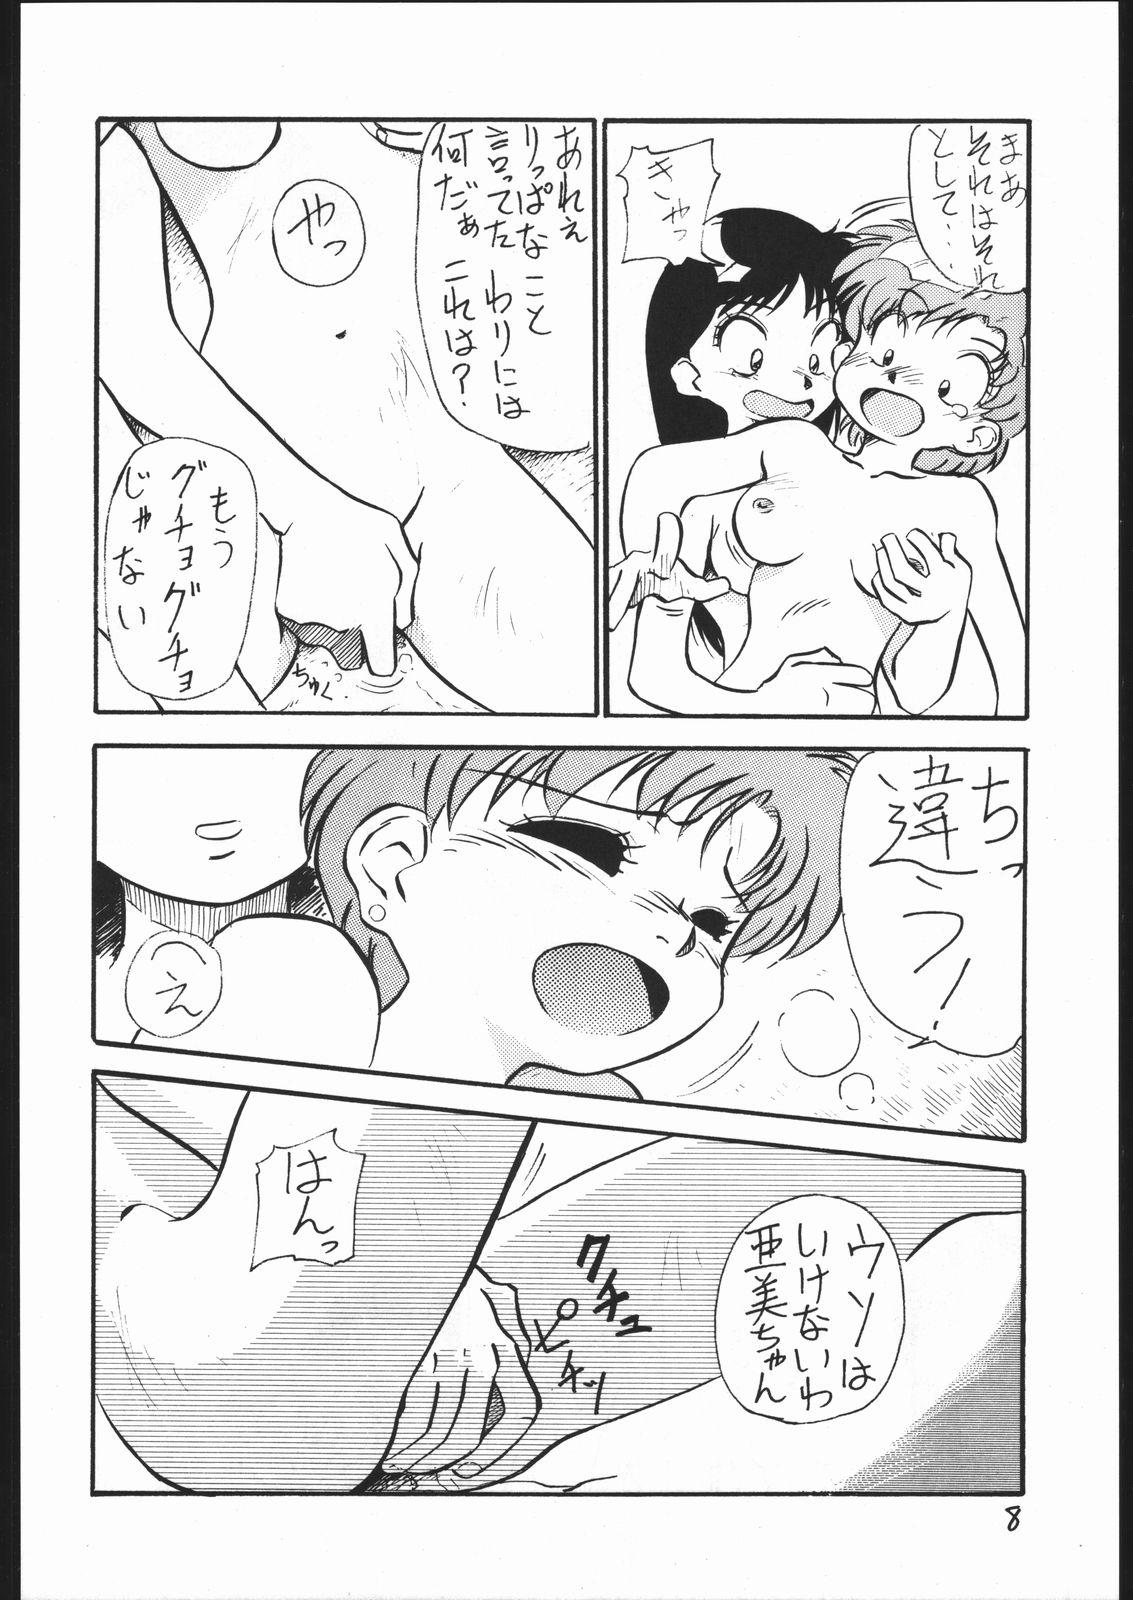 Roleplay V・H・S・M Vol. 1 - Sailor moon Farting - Page 7